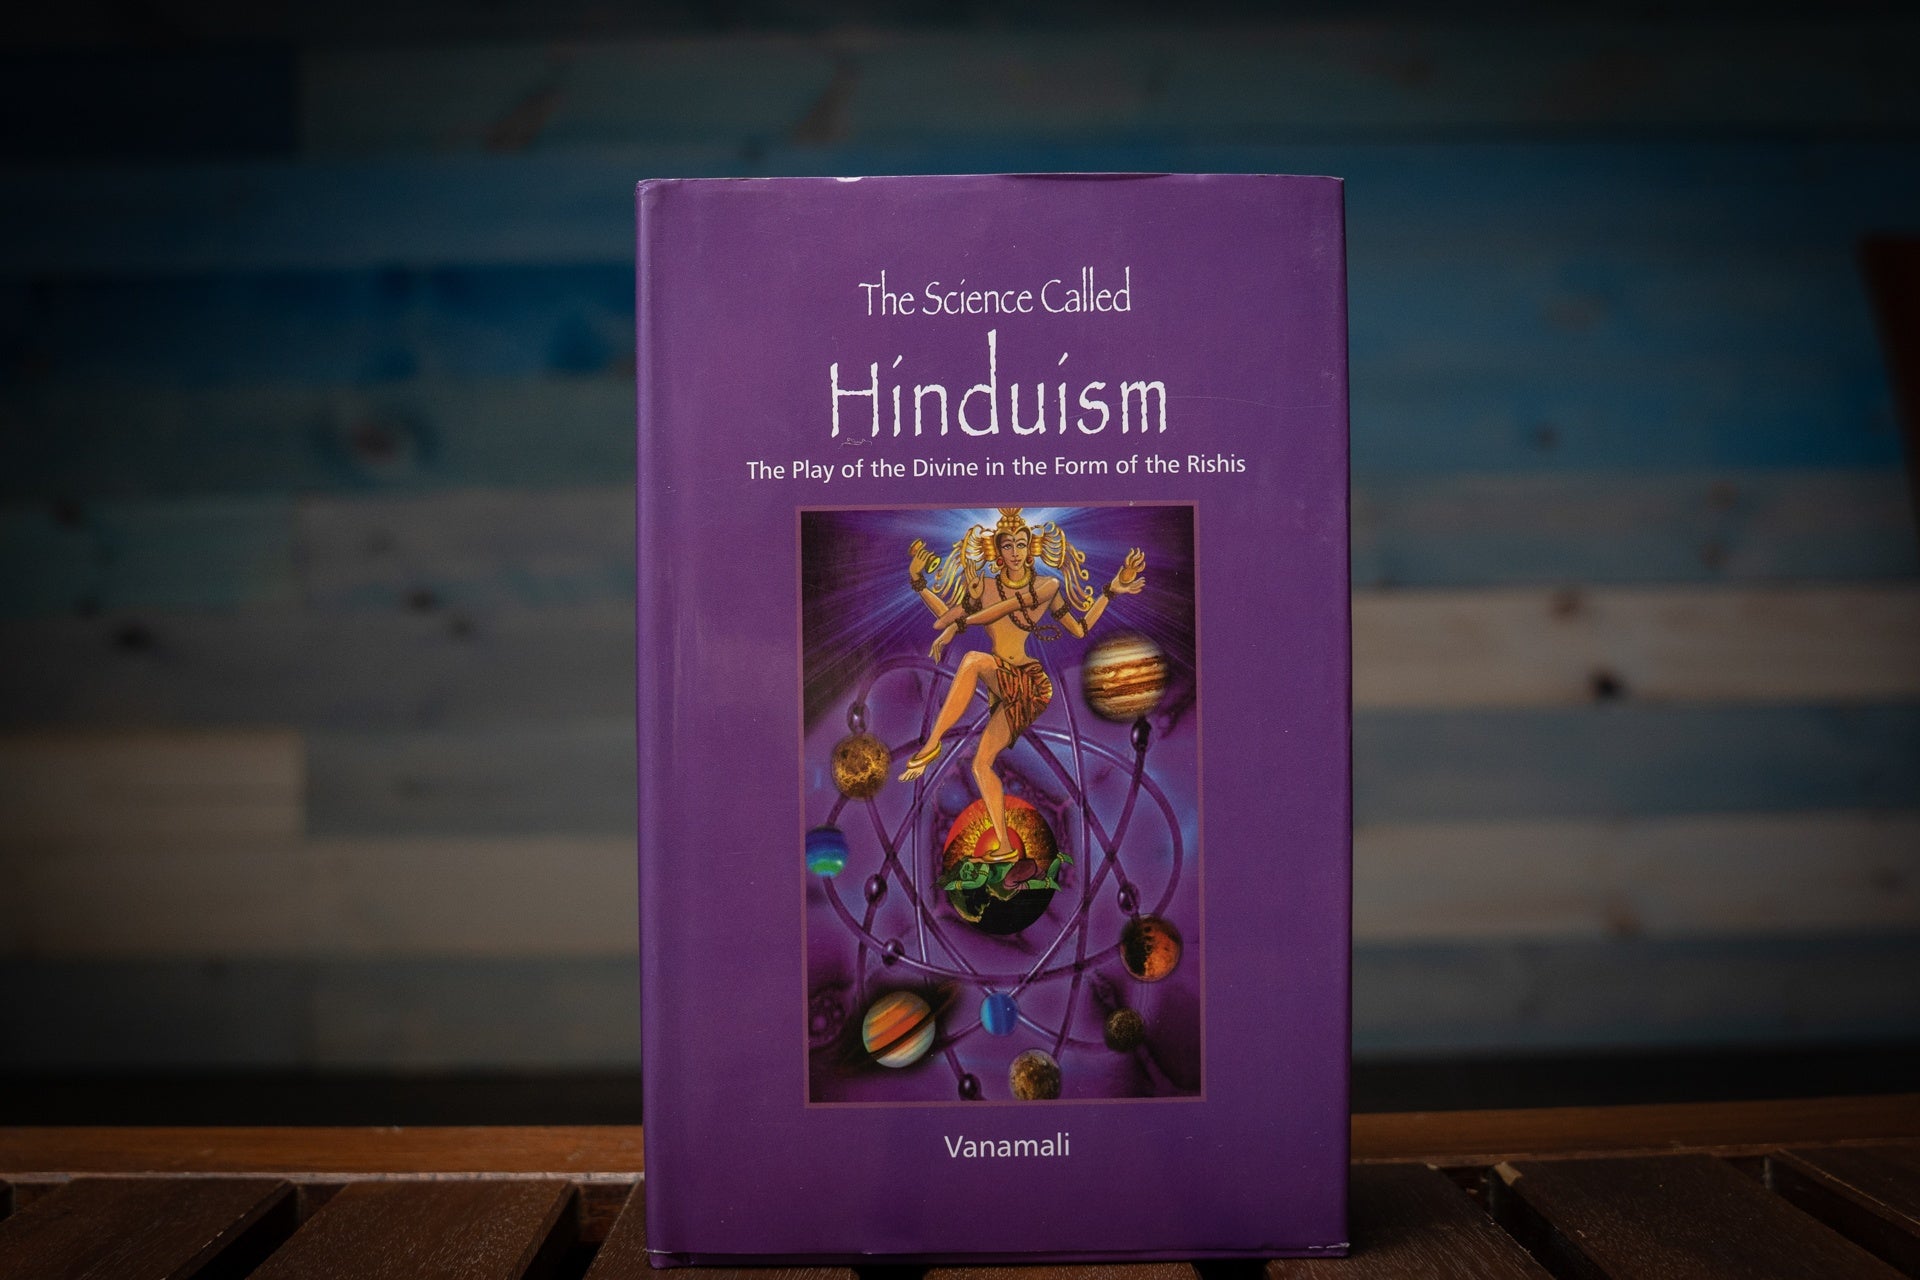 The Science Called Hinduism: The Play of the Divine in the Form of the Rishis. Vanamali